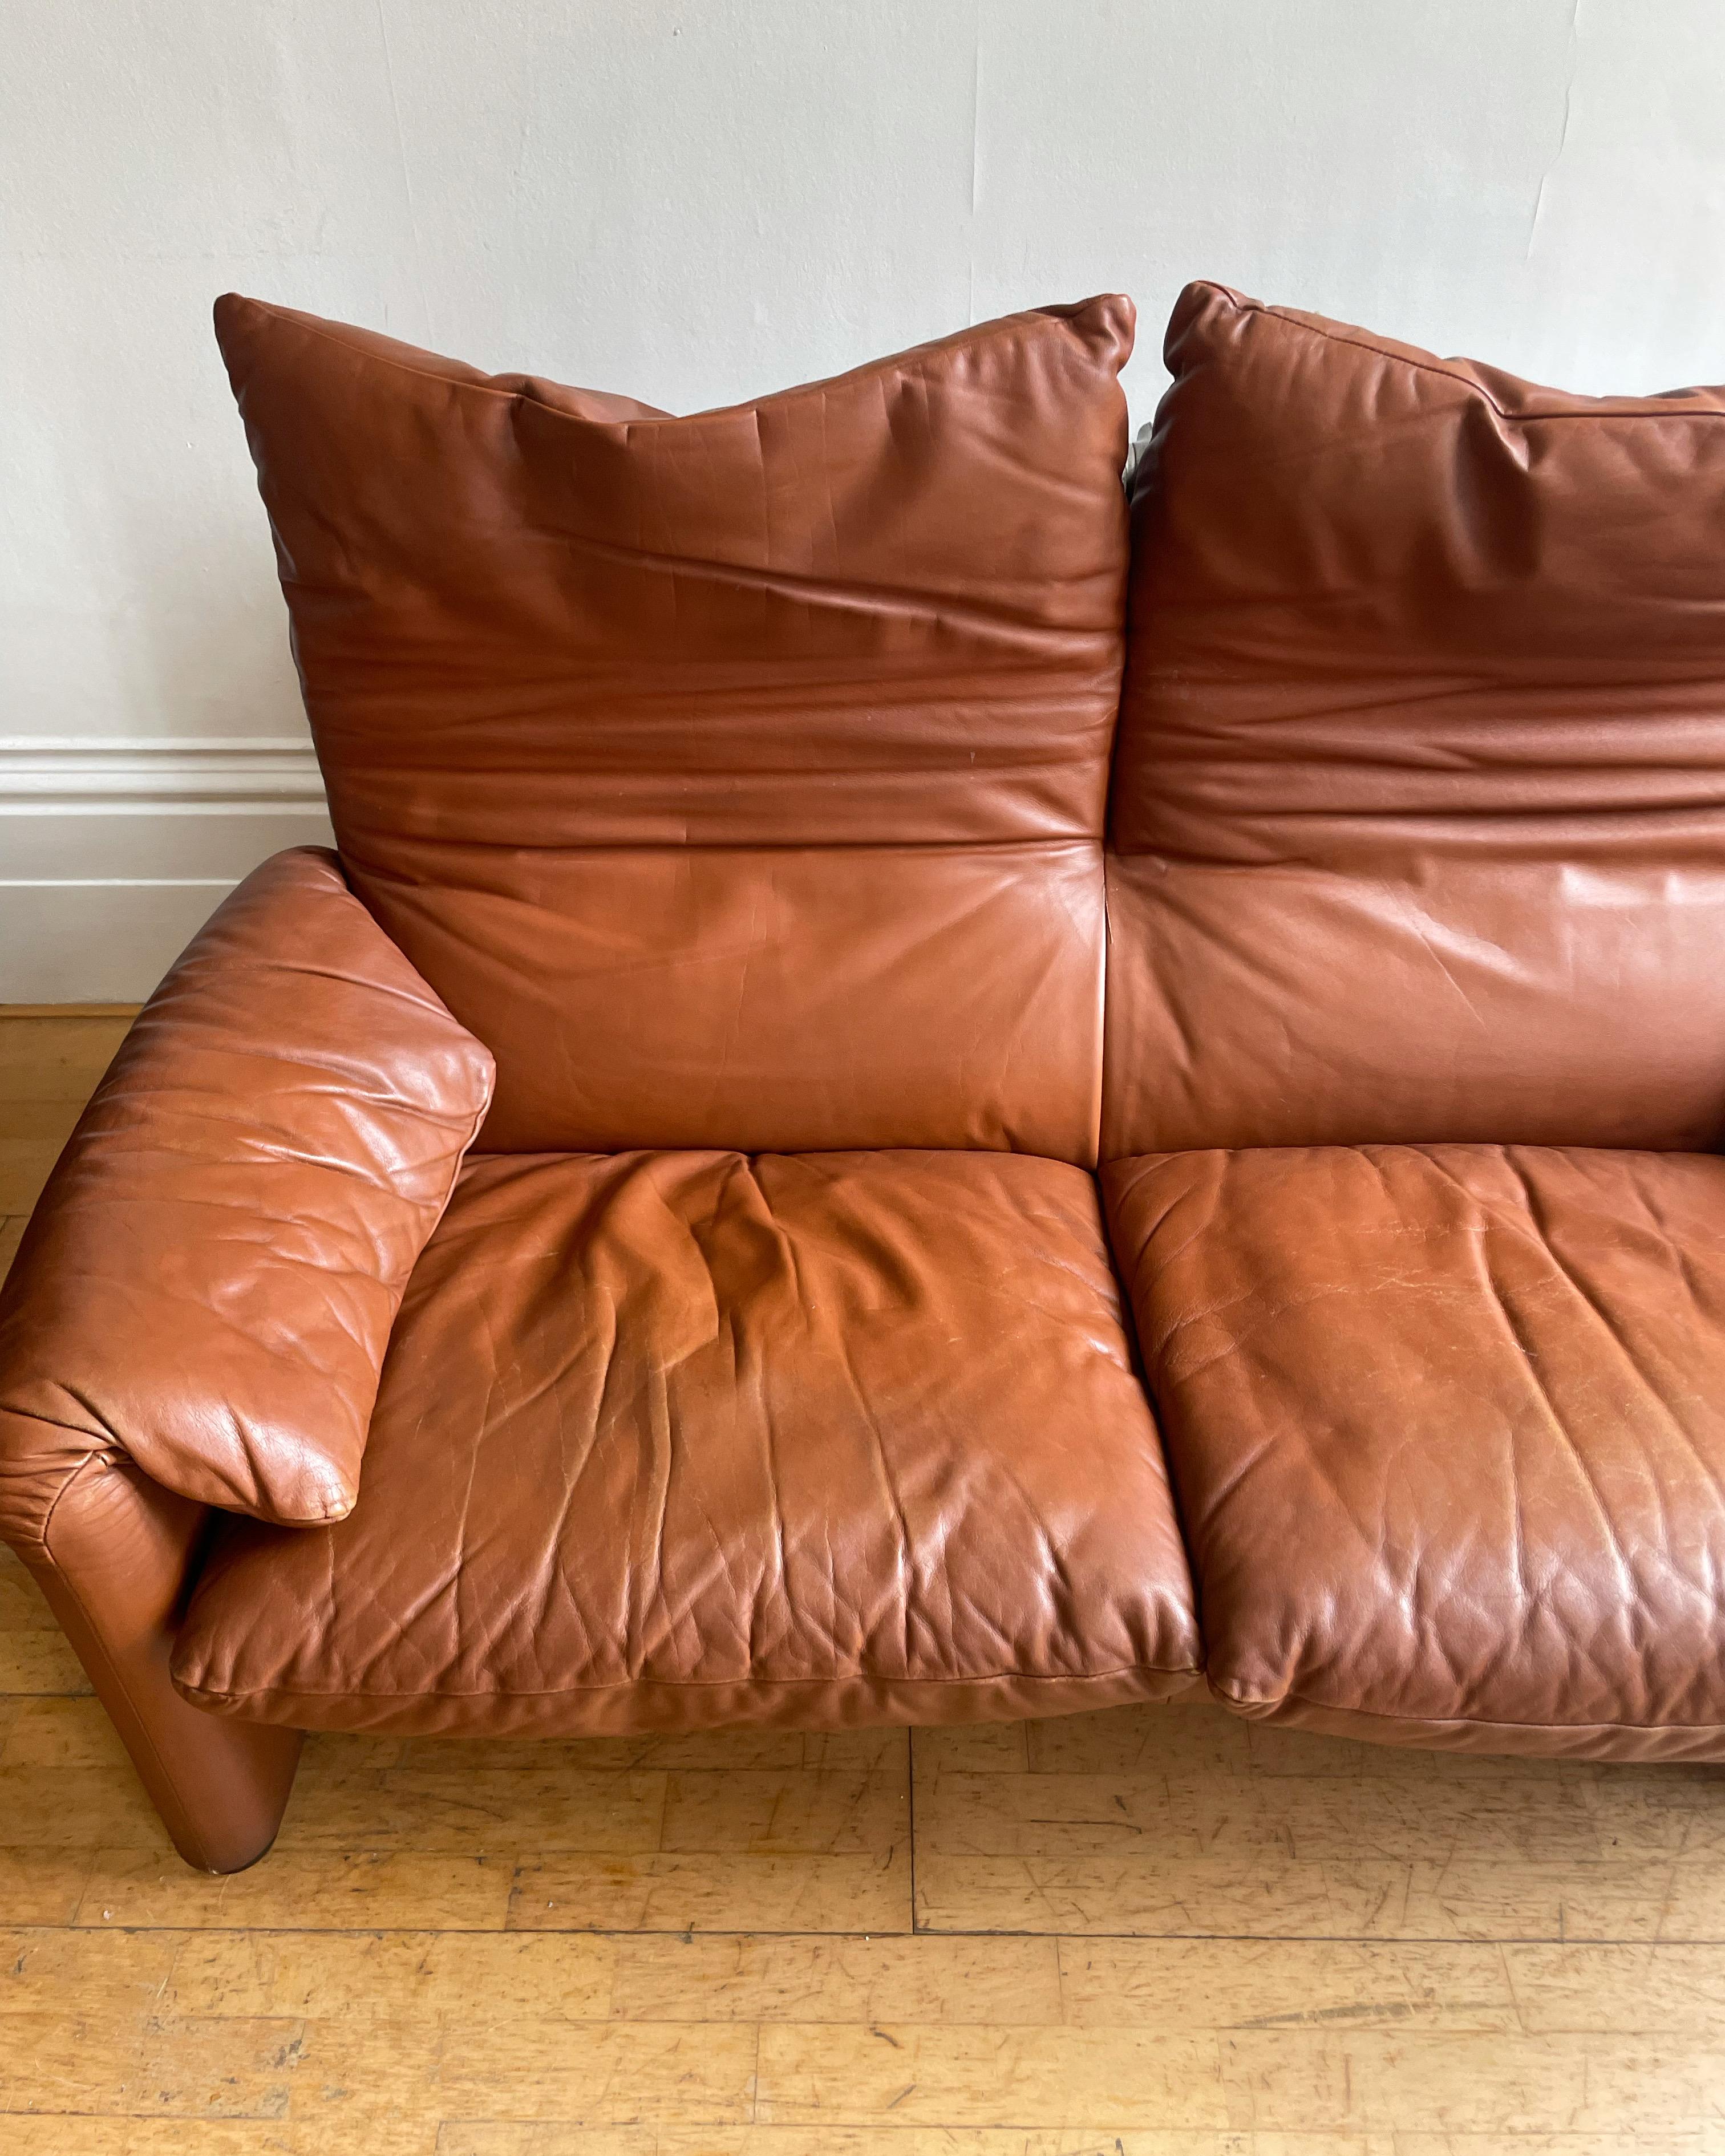 Here is a vintage version of the leather Maralunga two-seater sofa, designed by Vico Magistretti in 1973. It remains with its original tan brown leather, still in good condition, with some scuffs and creasing to the seating as documented, as well as